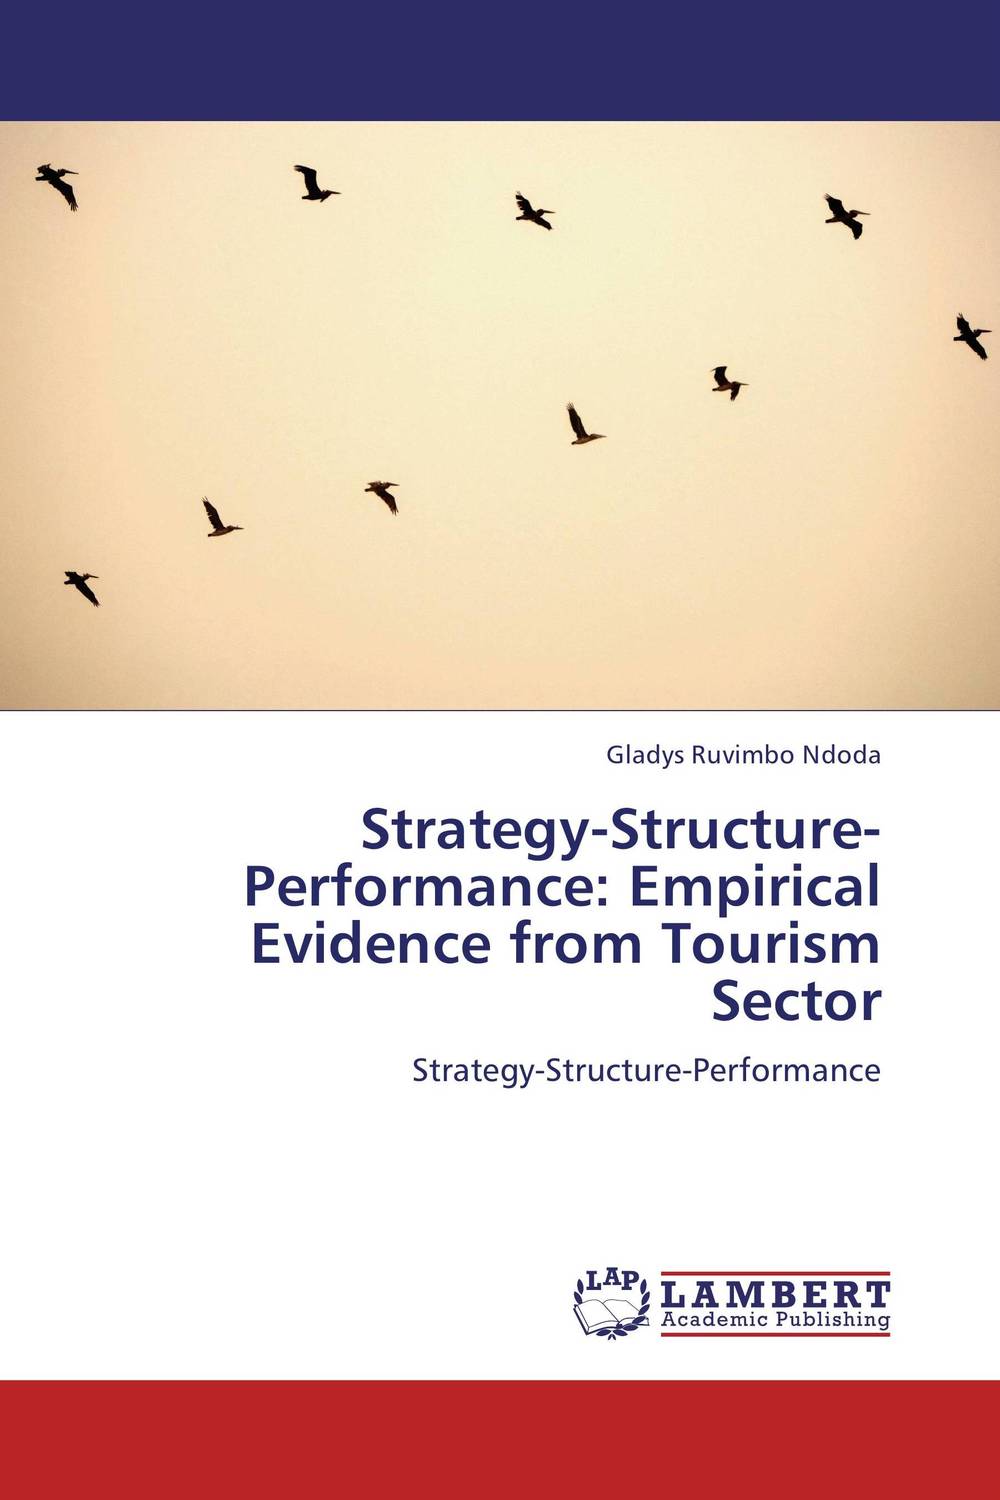 Strategy-Structure-Performance: Empirical Evidence from Tourism Sector